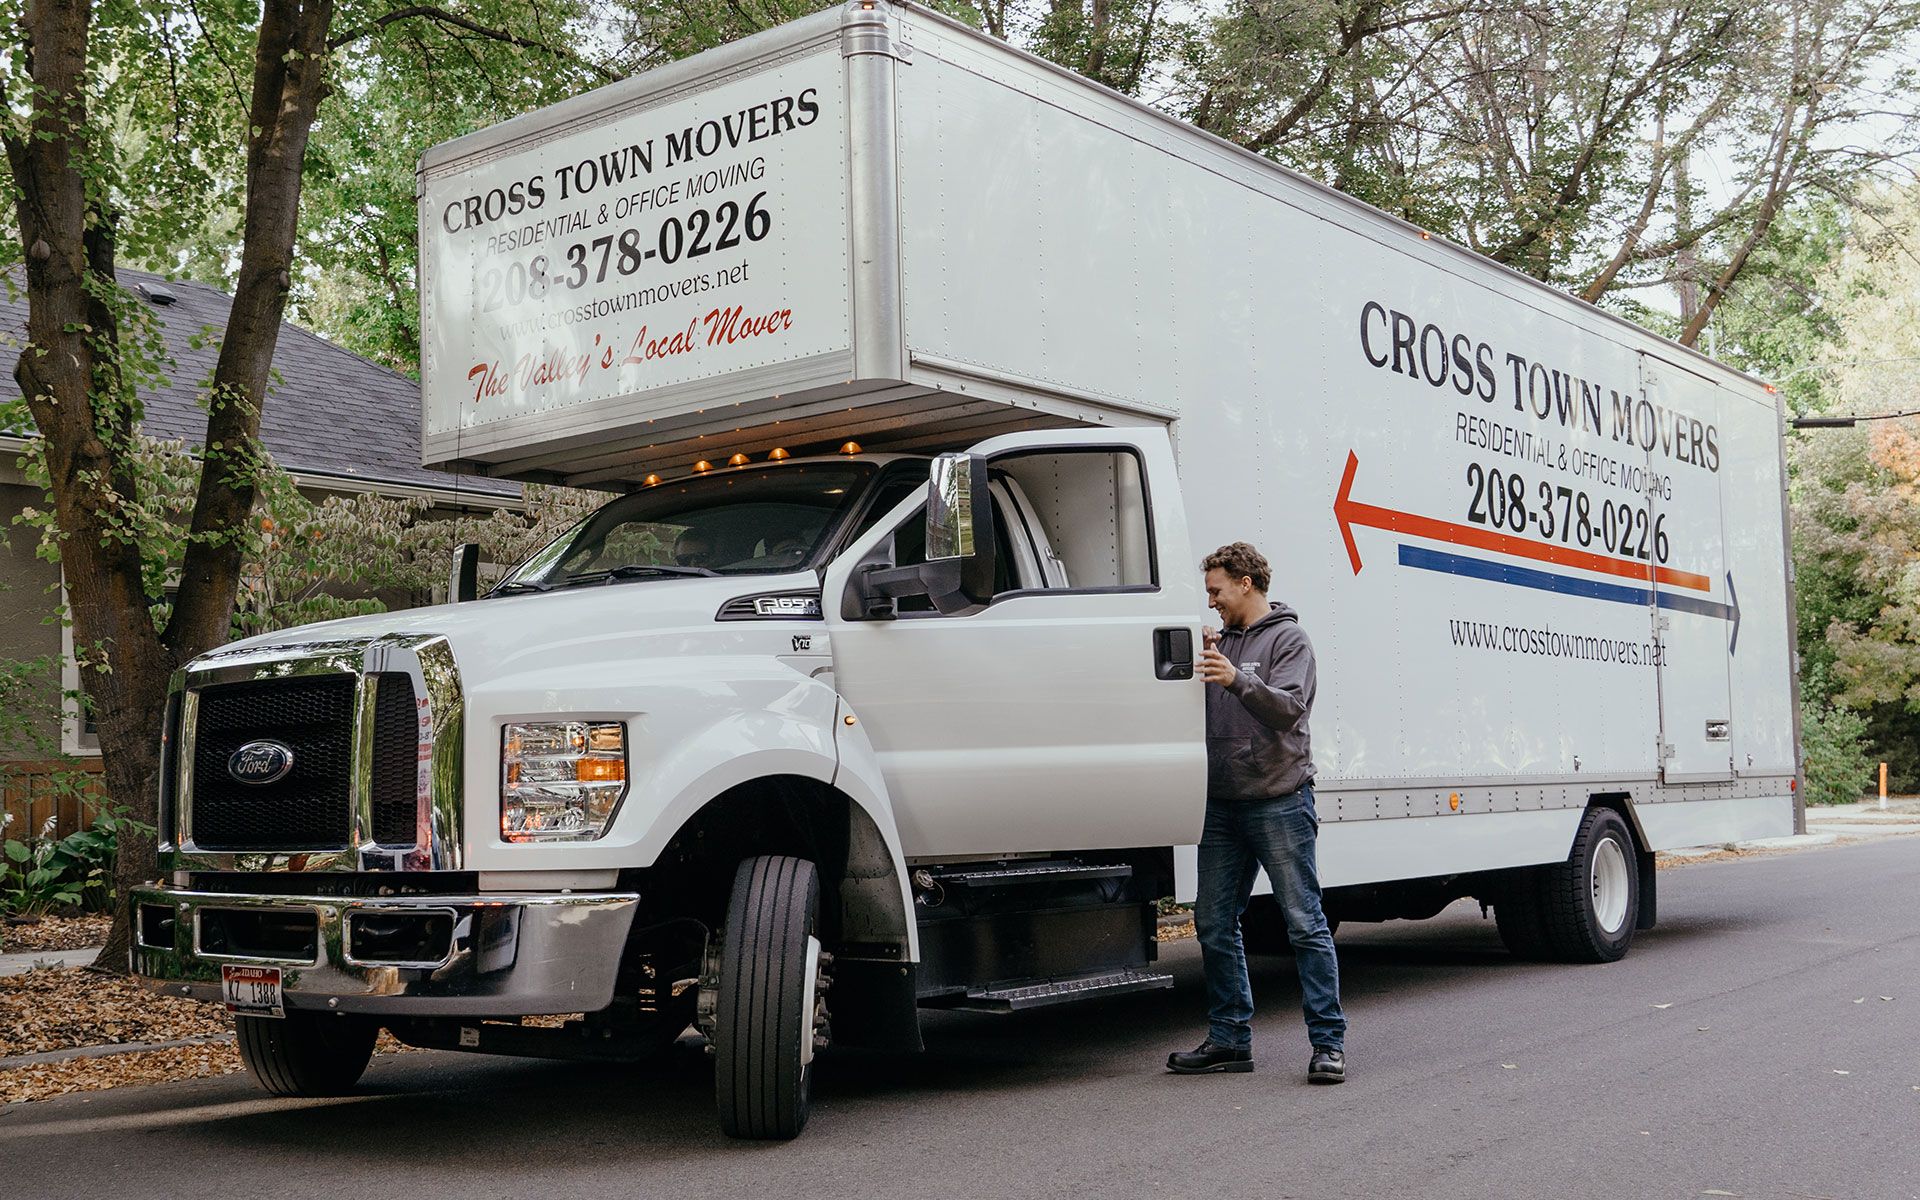 Cross Town Movers crew member getting into their truck | Cross Town Movers Boise, ID